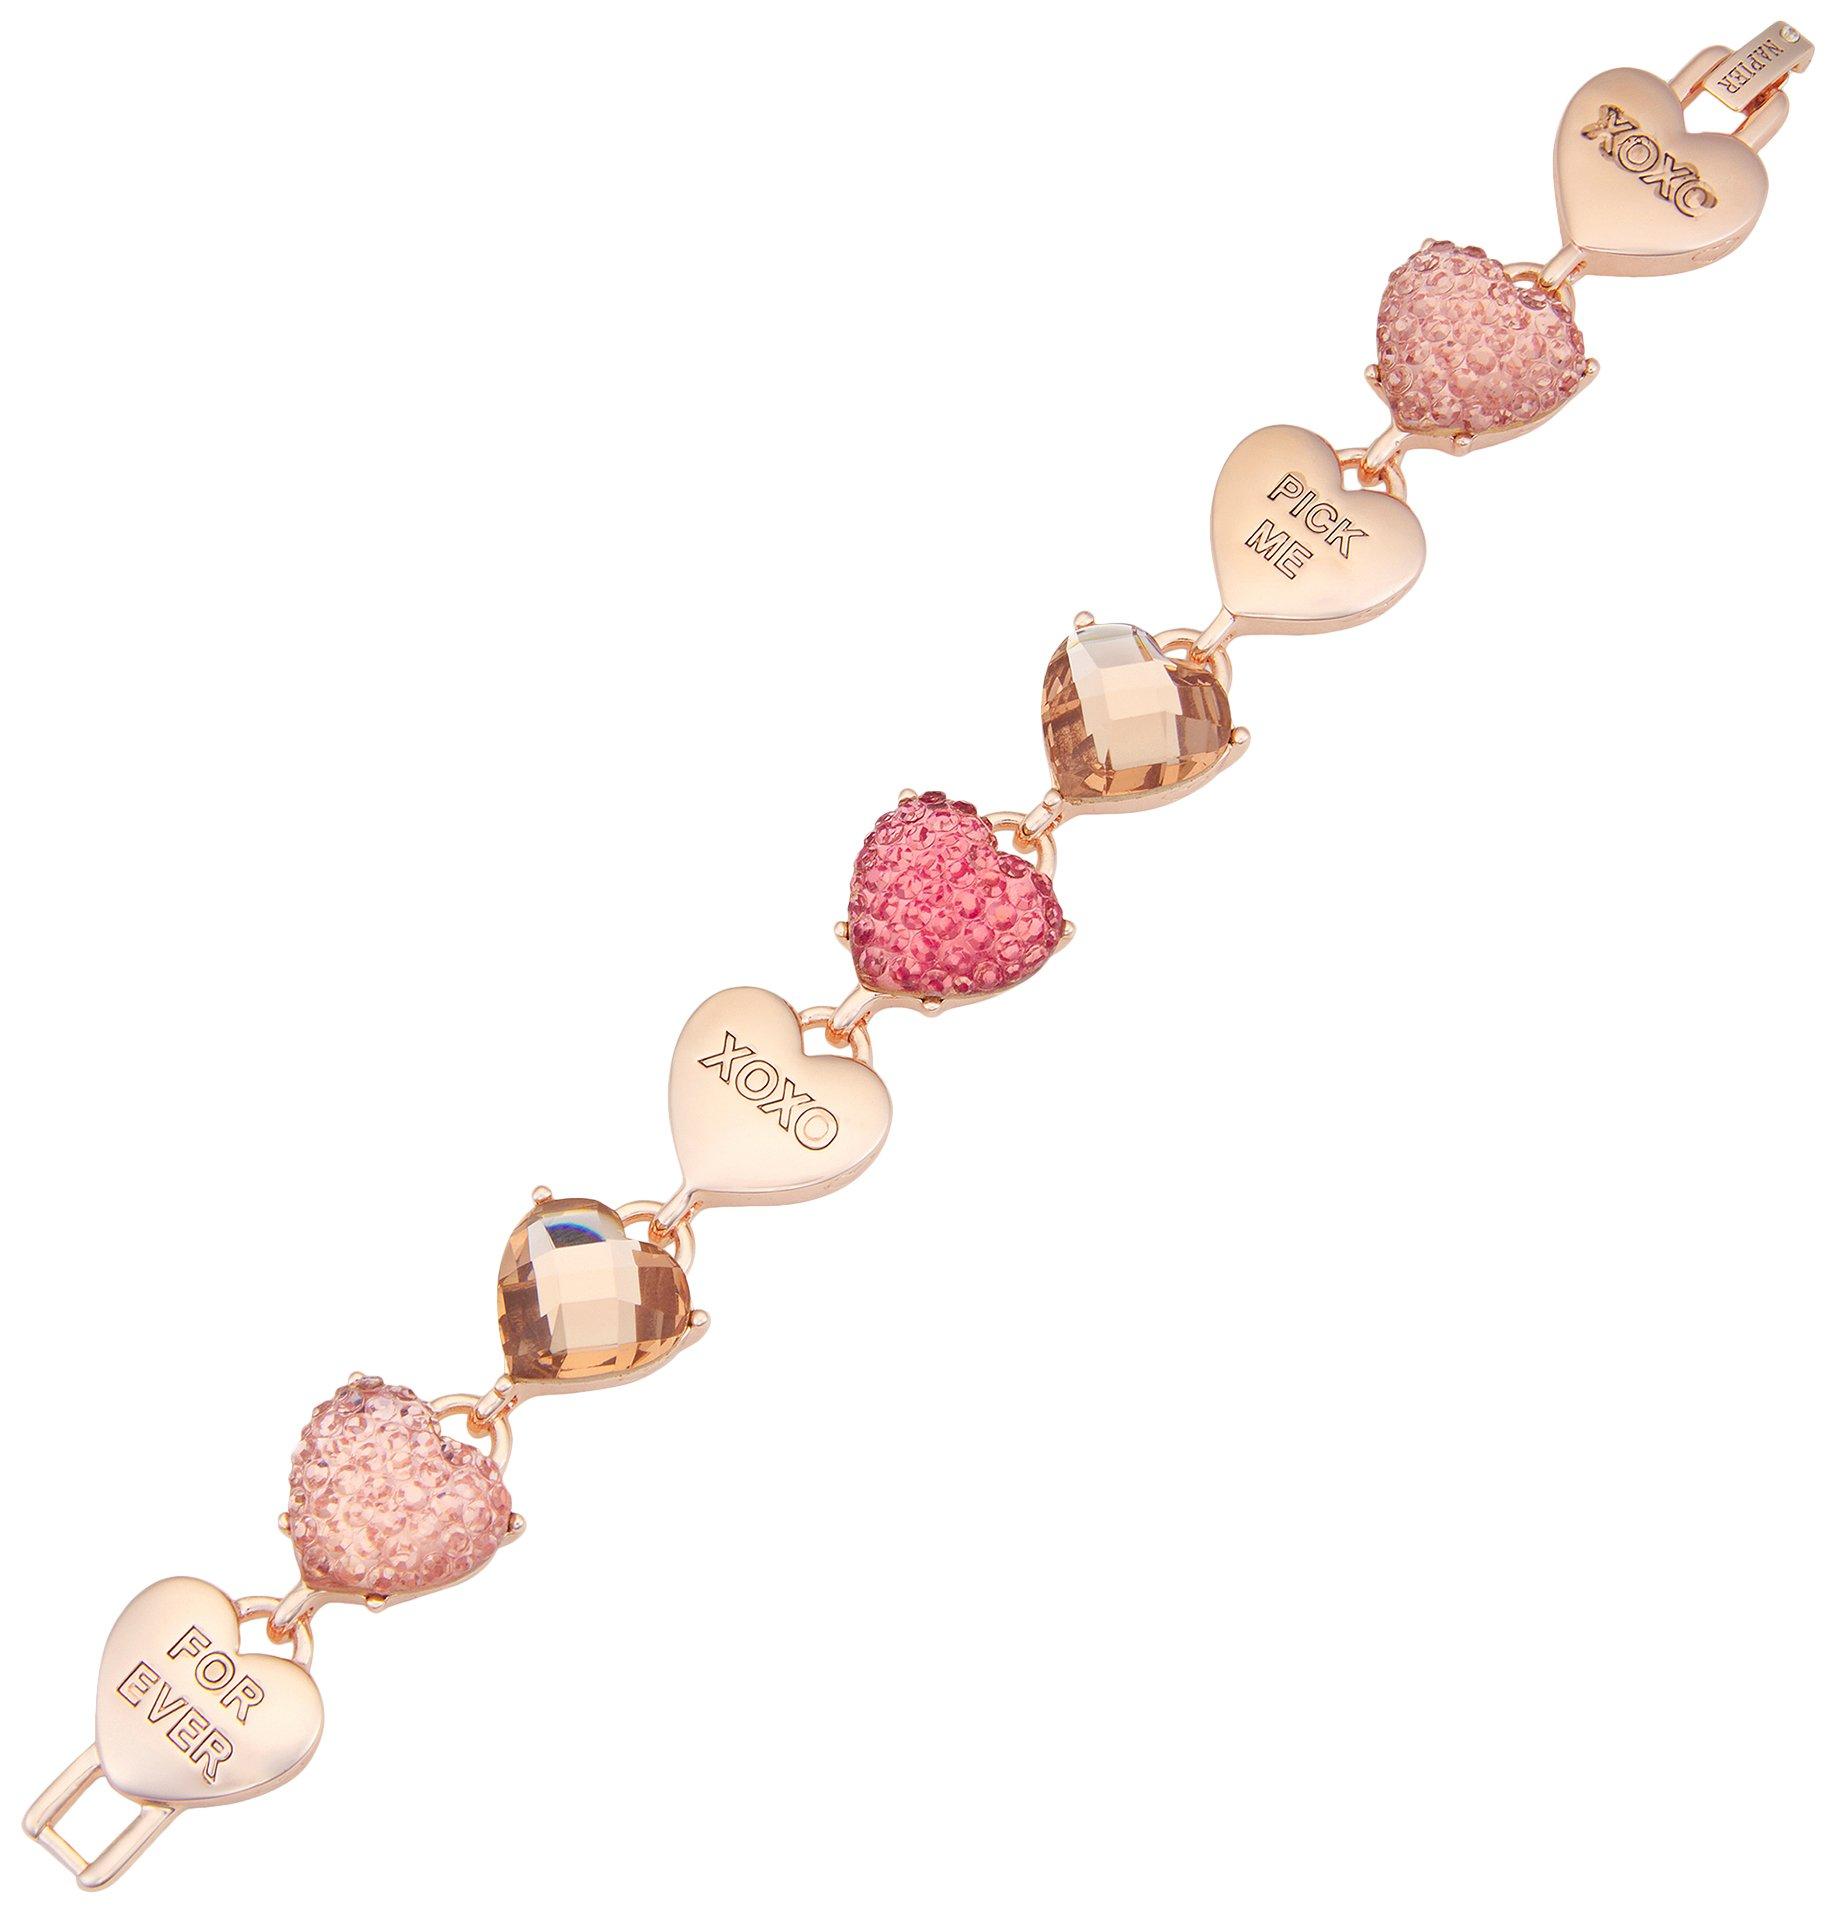 7.5 In. Faceted Candy Hearts Link Bracelet